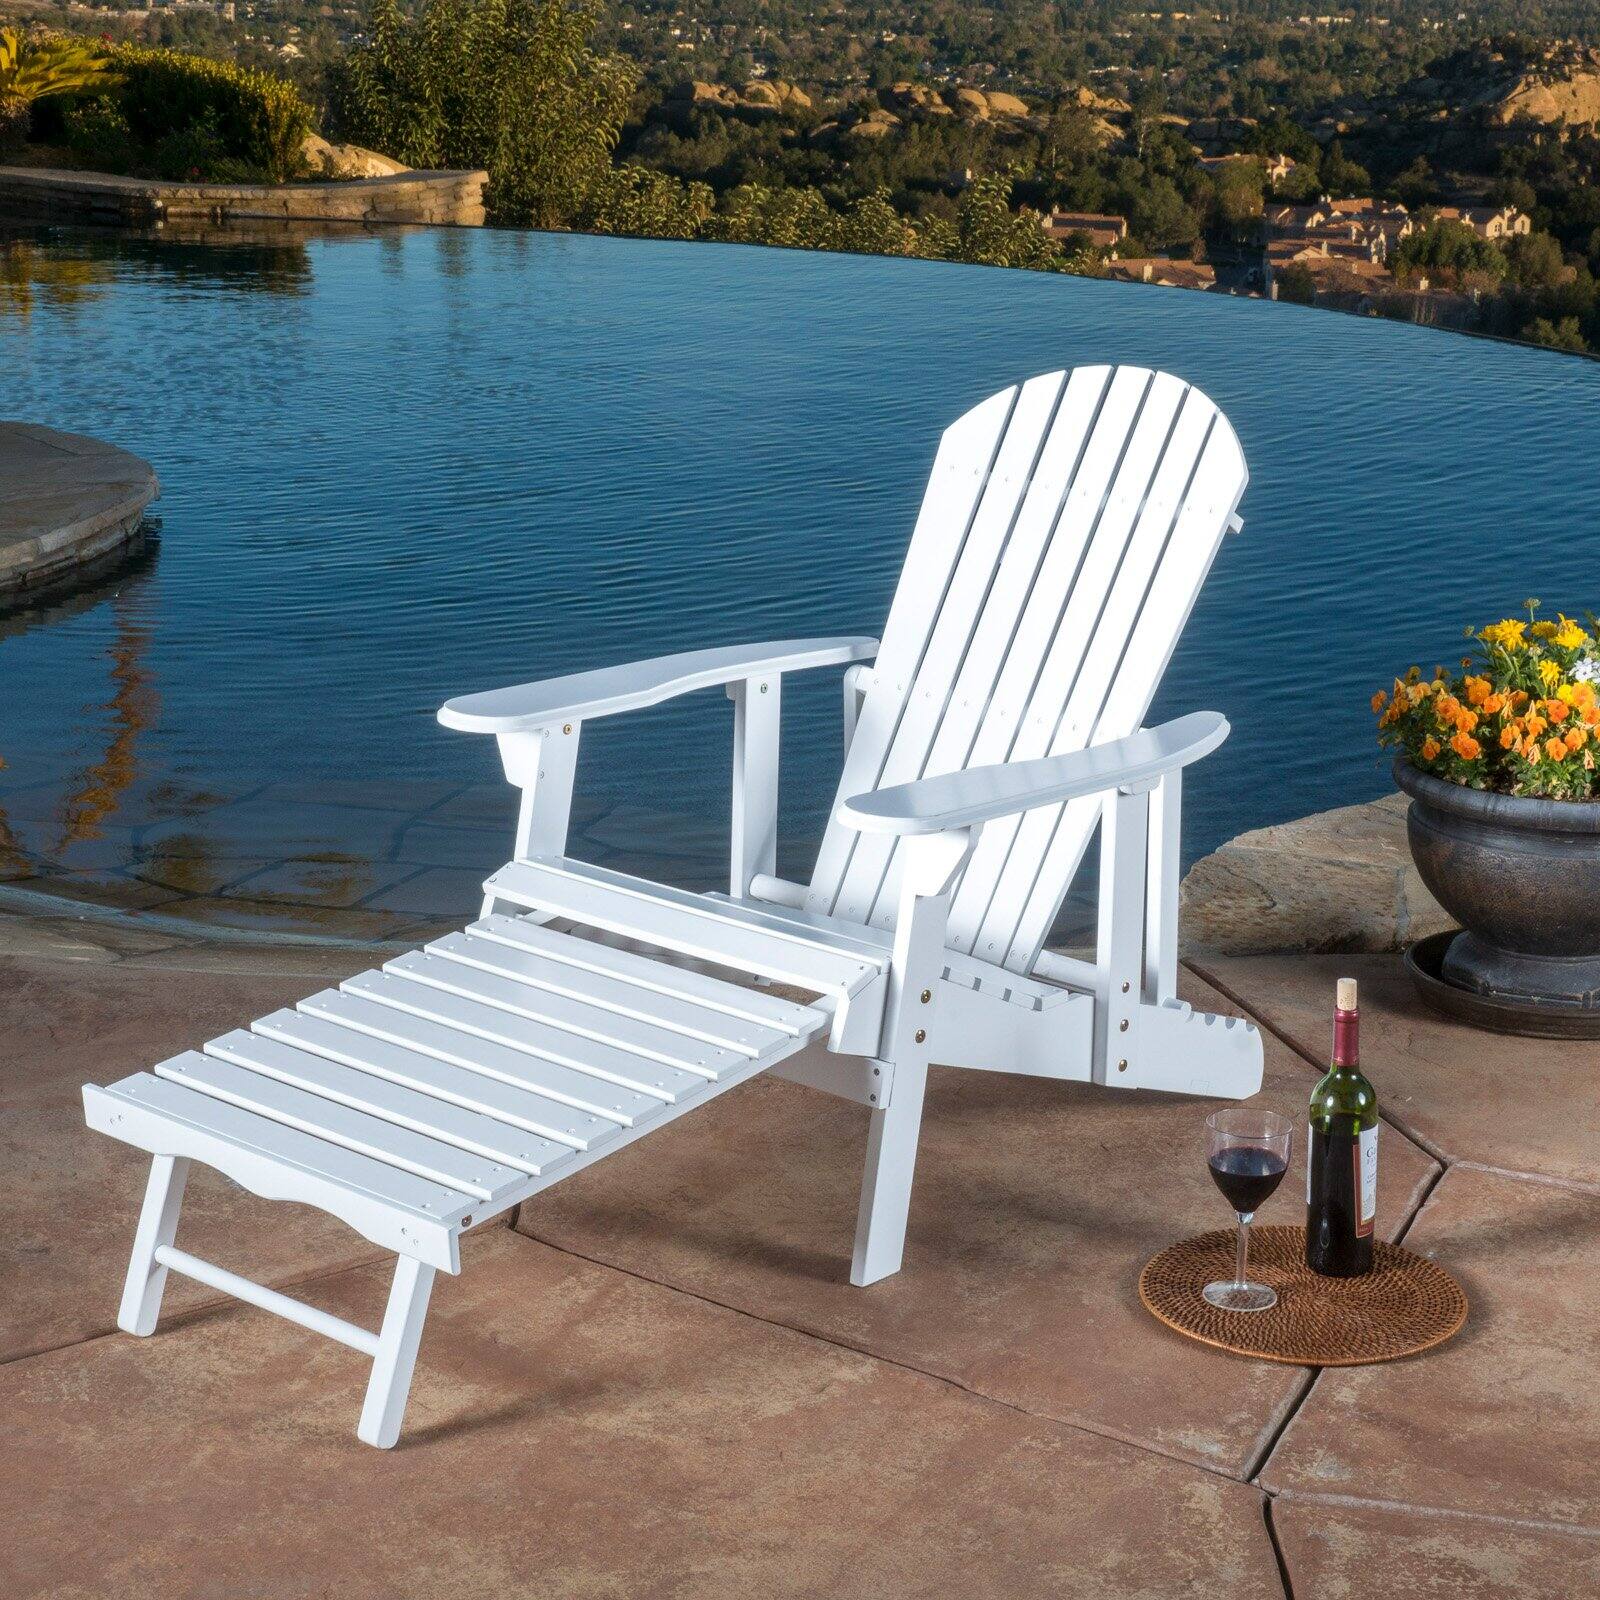 Hayle Reclining Adirondack Chair with Footrest - Set of 2 - image 1 of 11